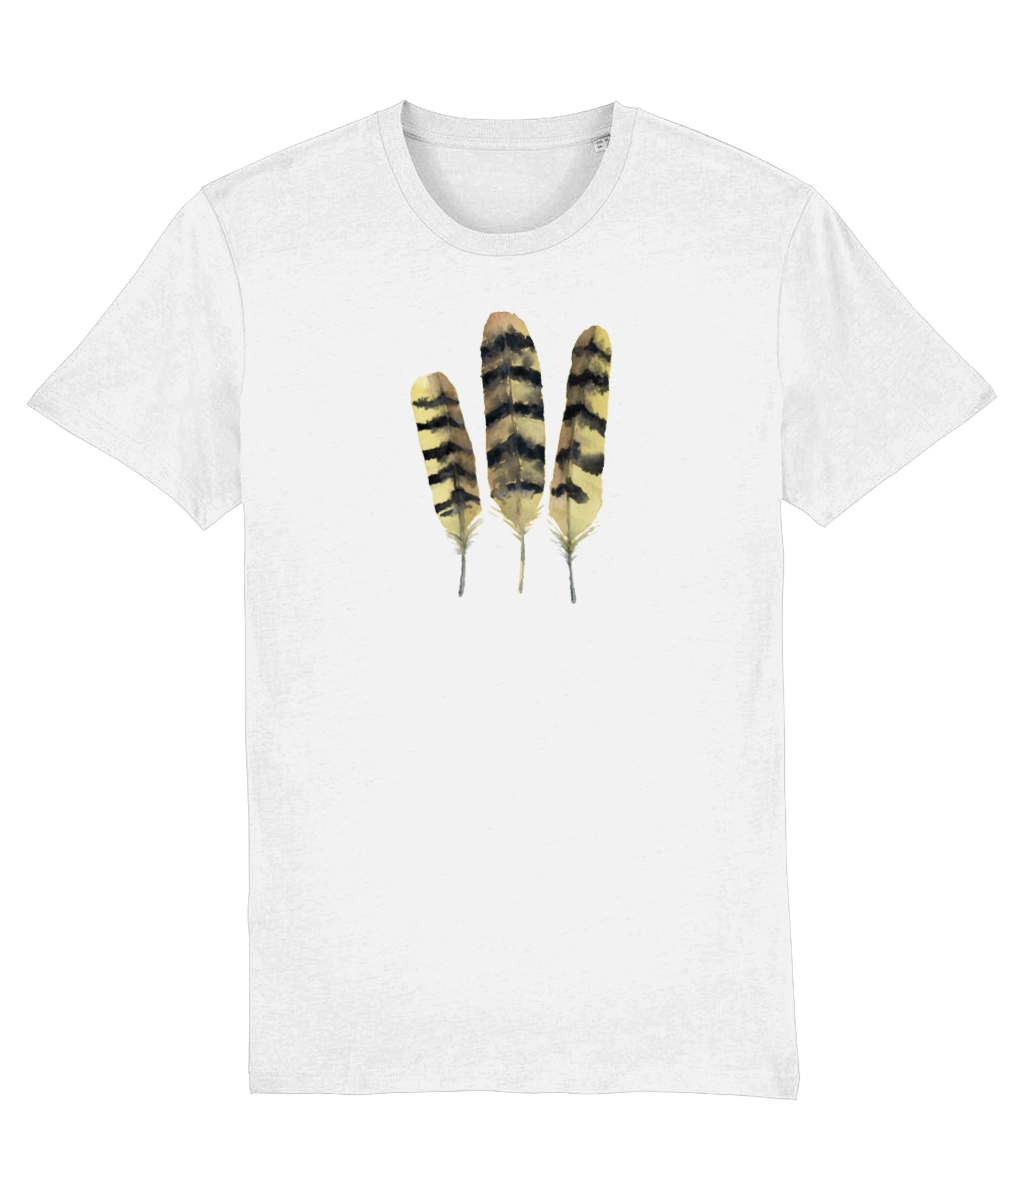 Owl feathers classic fit tee